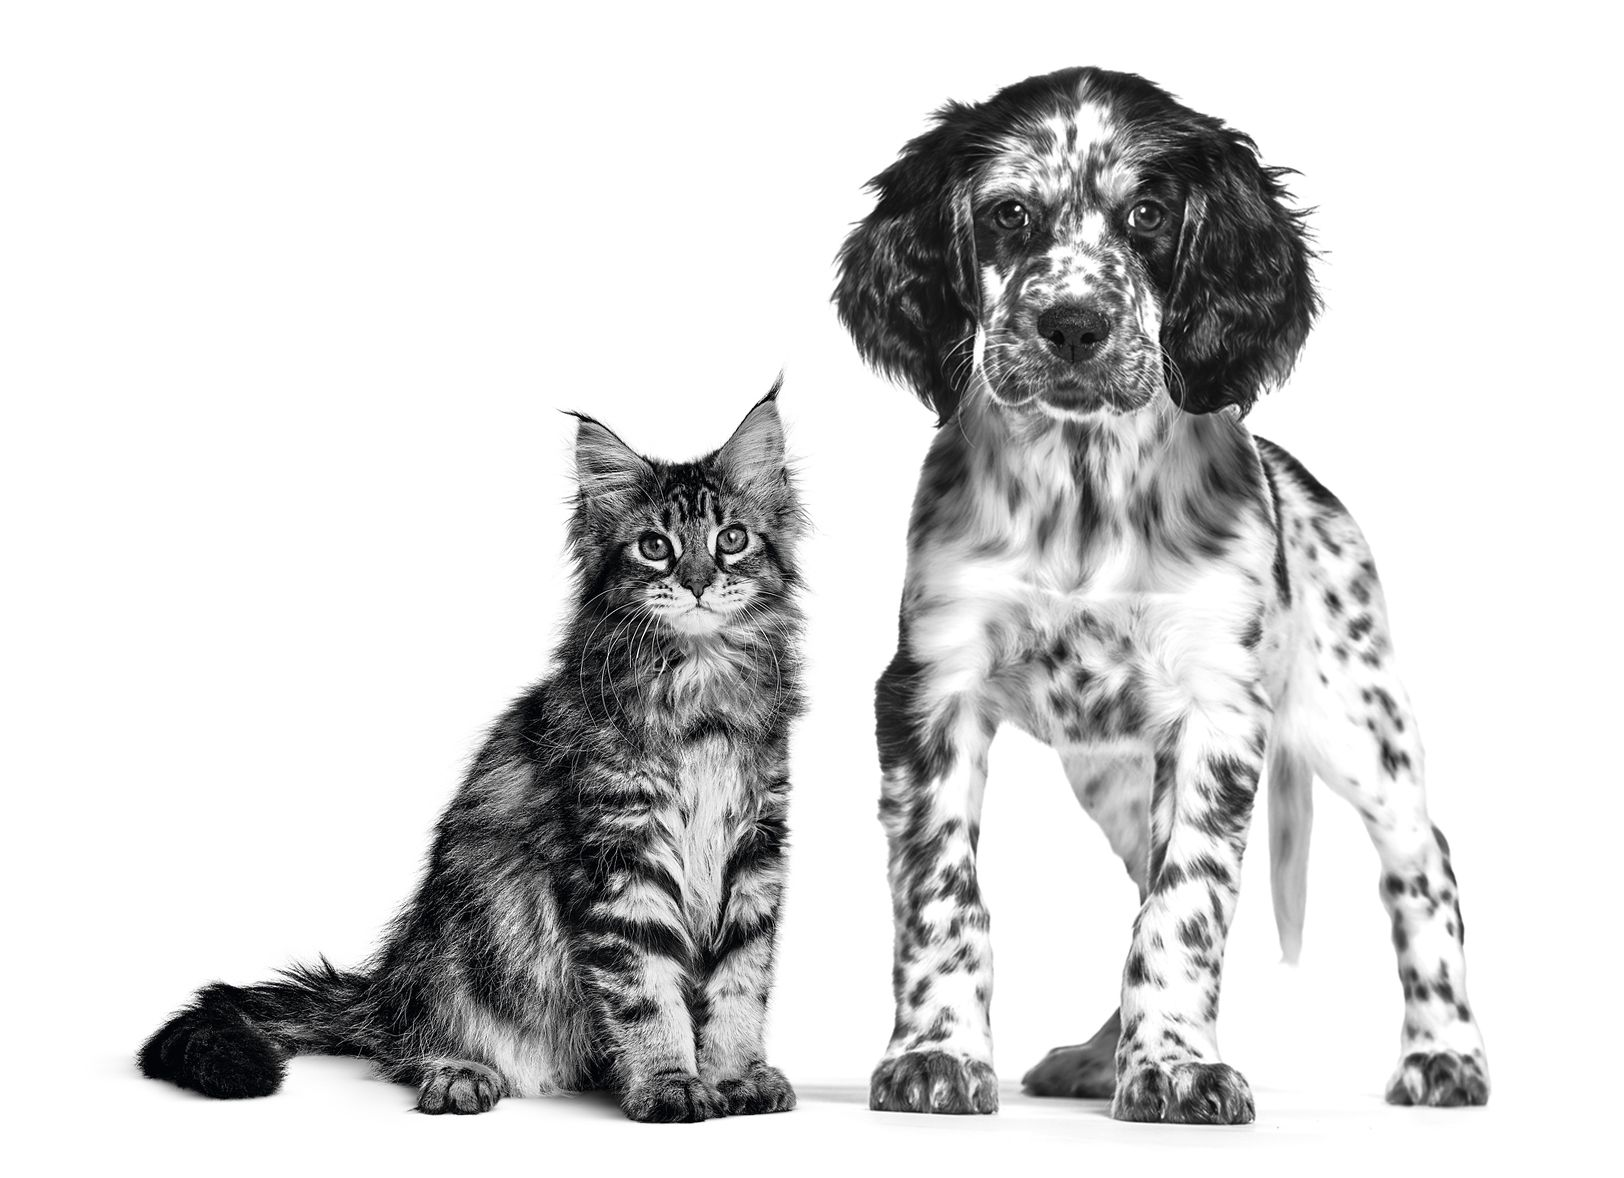 English setter and Maine coon kitten